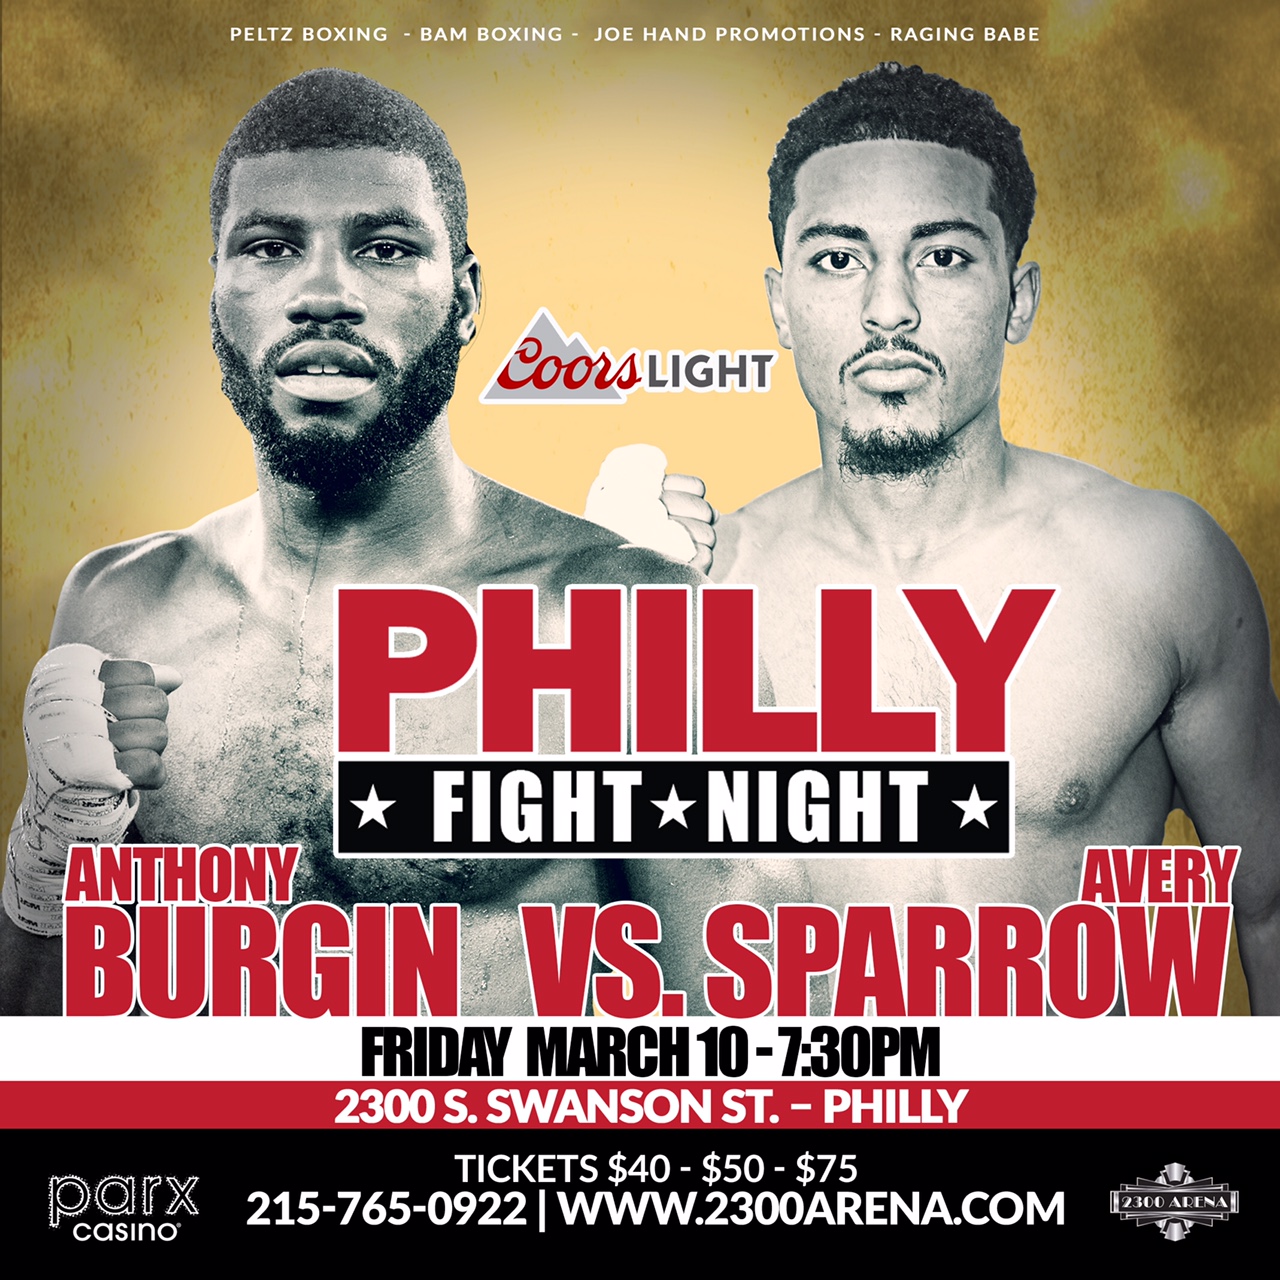 Two Philly Boxing Events This Weekend Friday & Saturday!